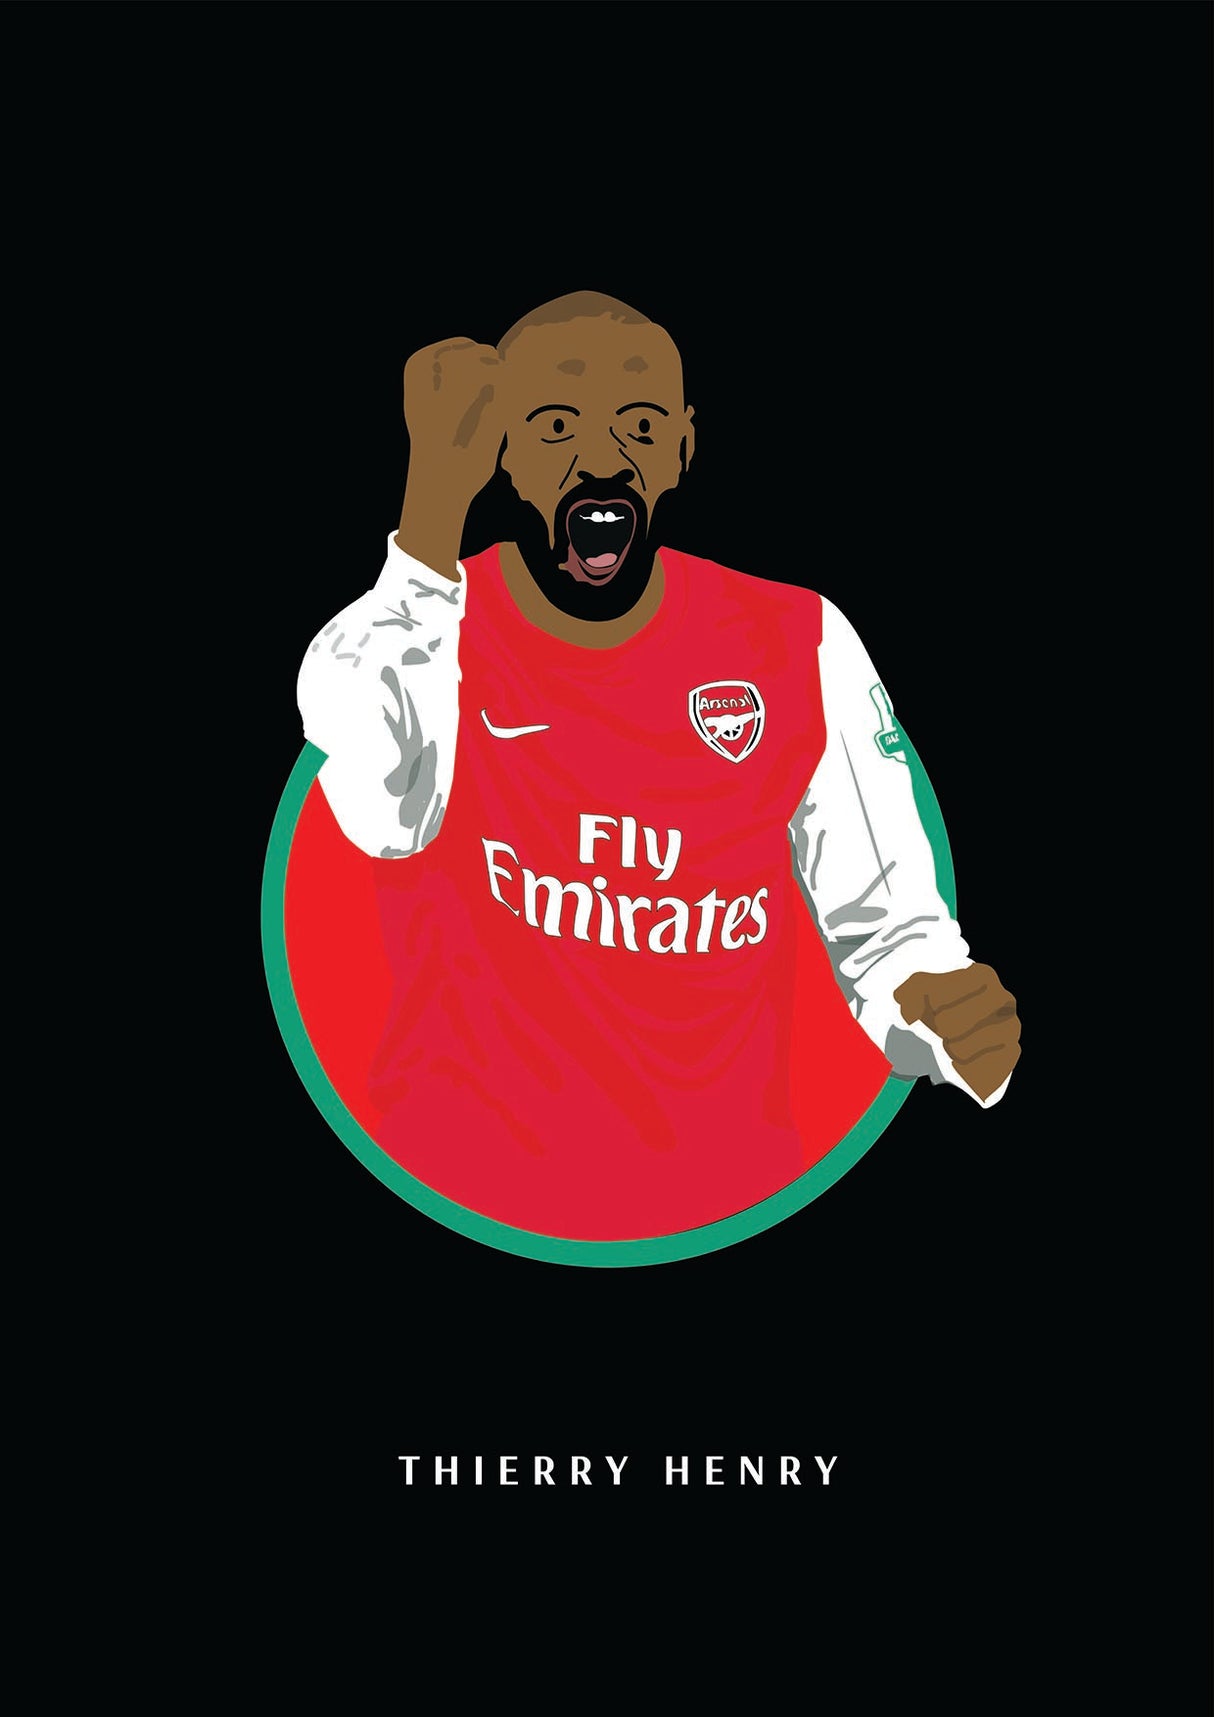 Thierry Henry poster